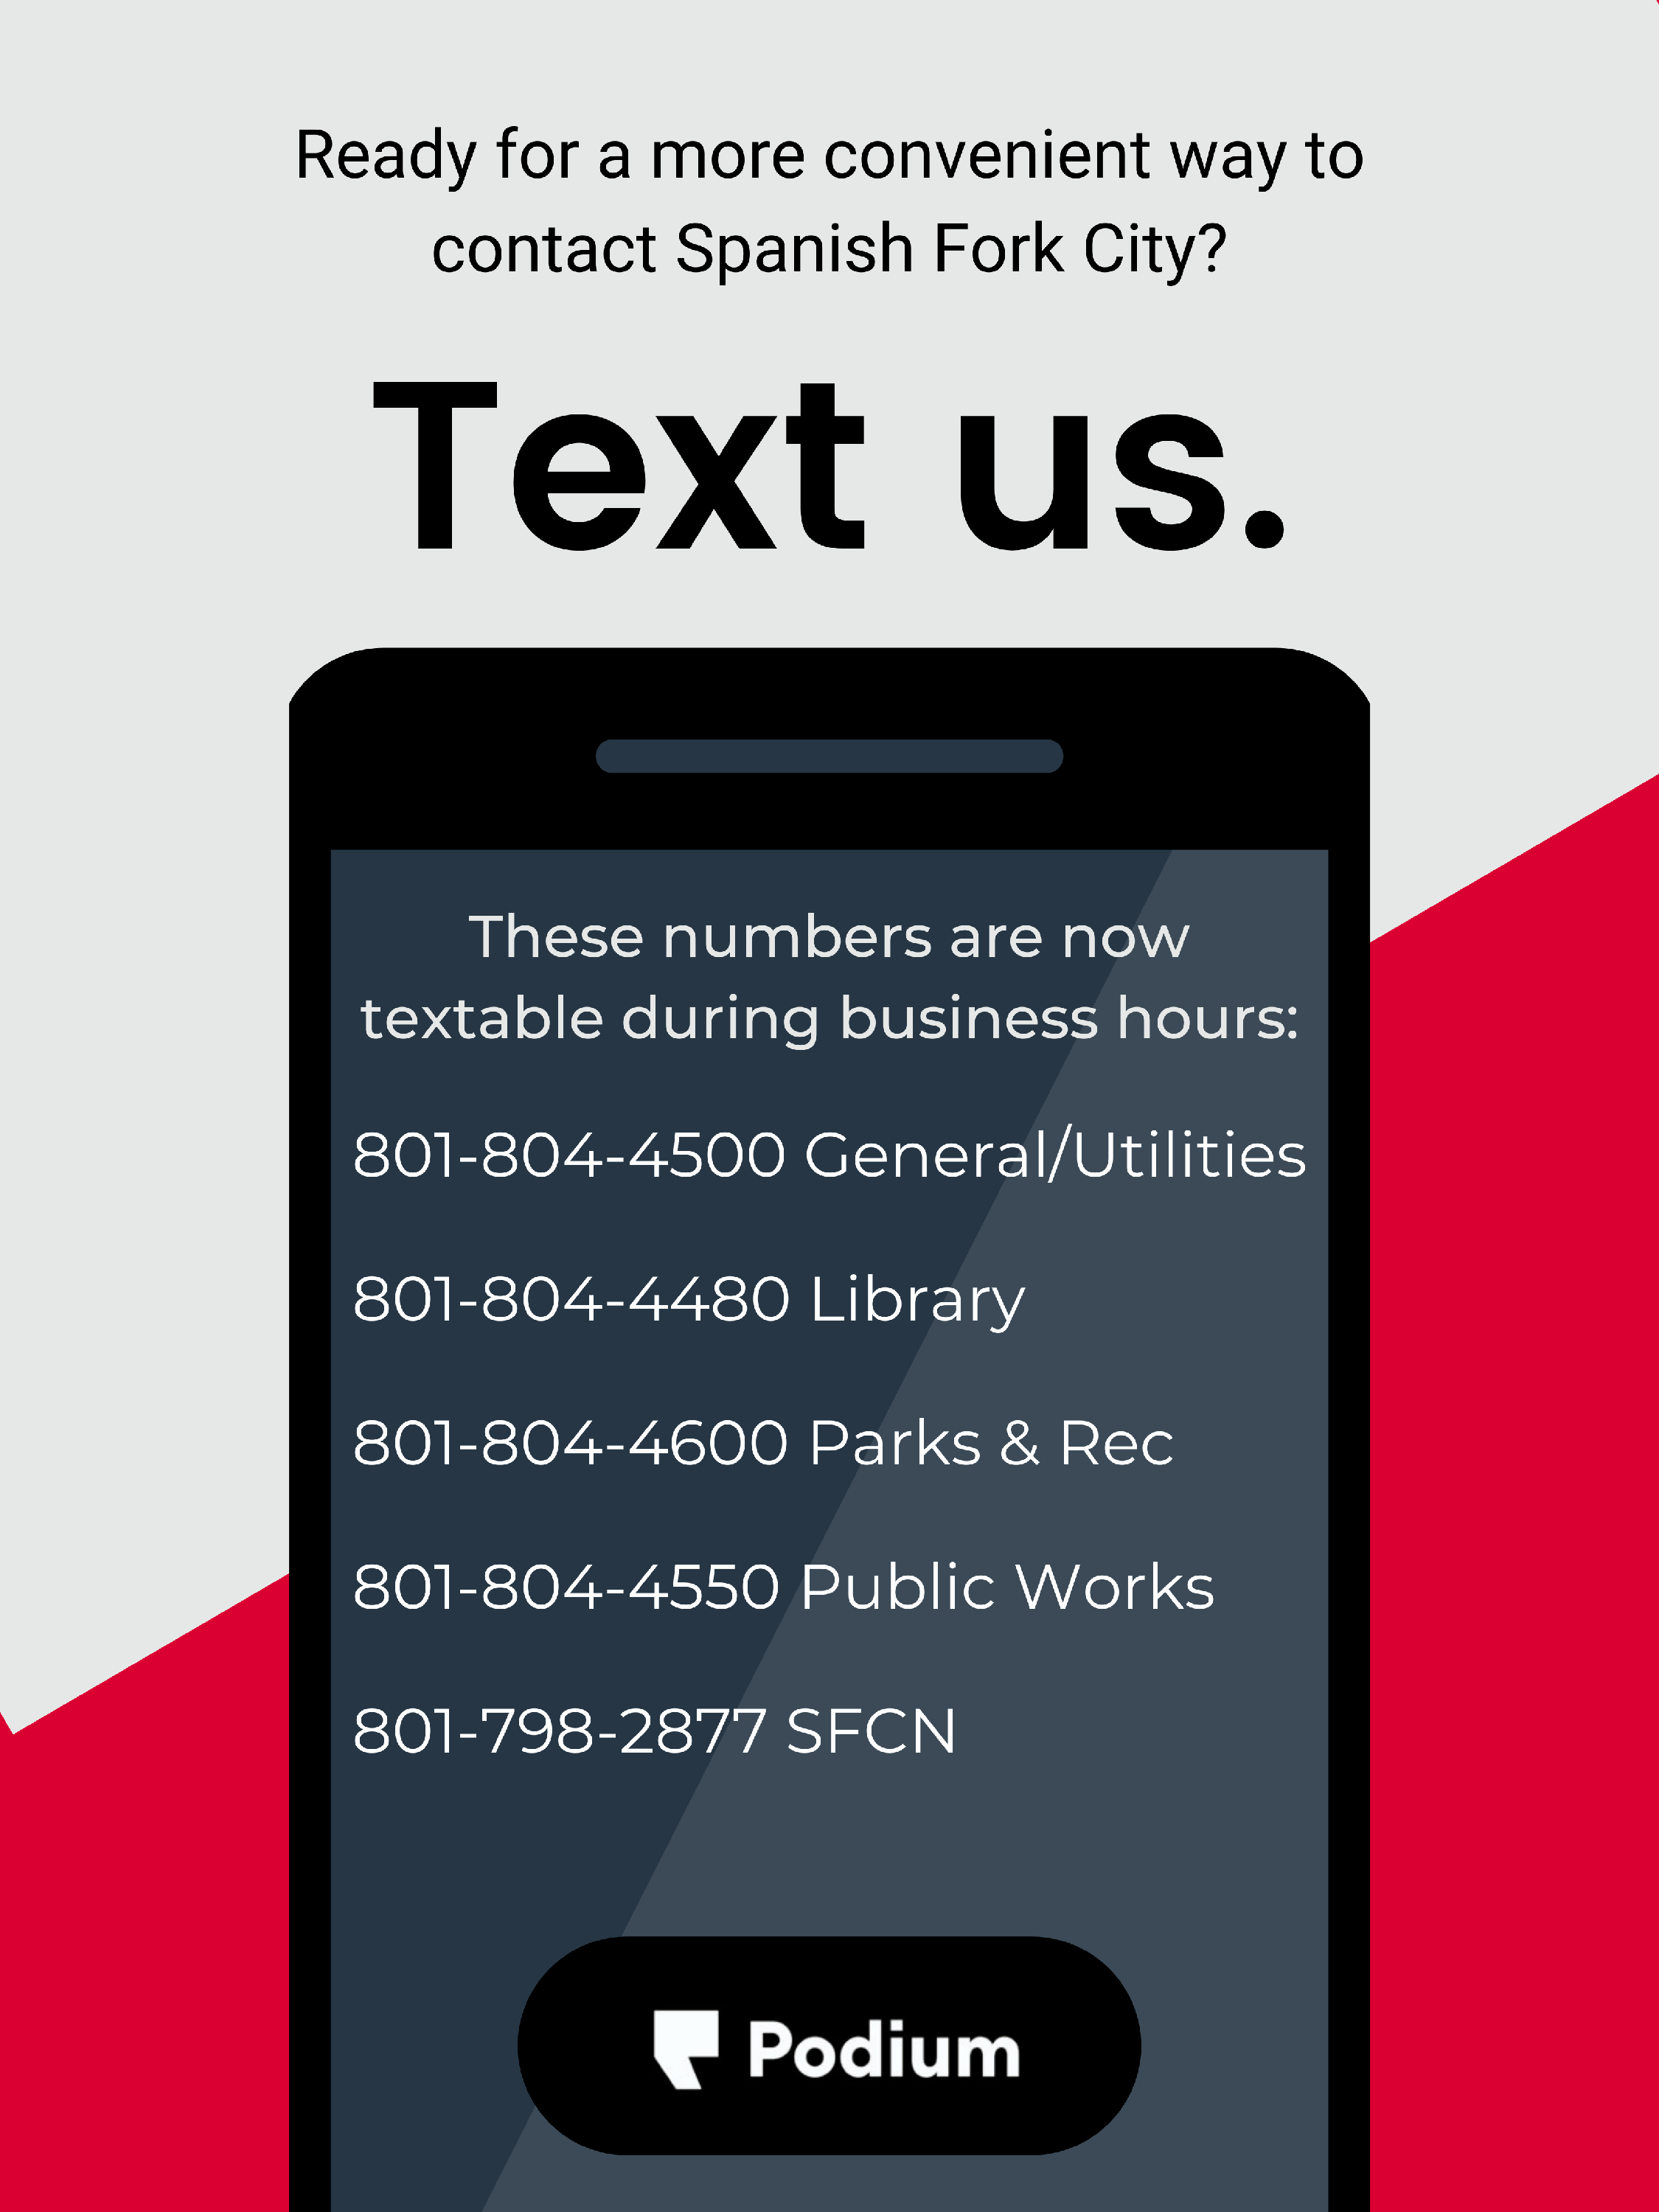 Looking for a more convenient way to contact Spanish Fork City? Text us. 801-804-4500 General/Utilities